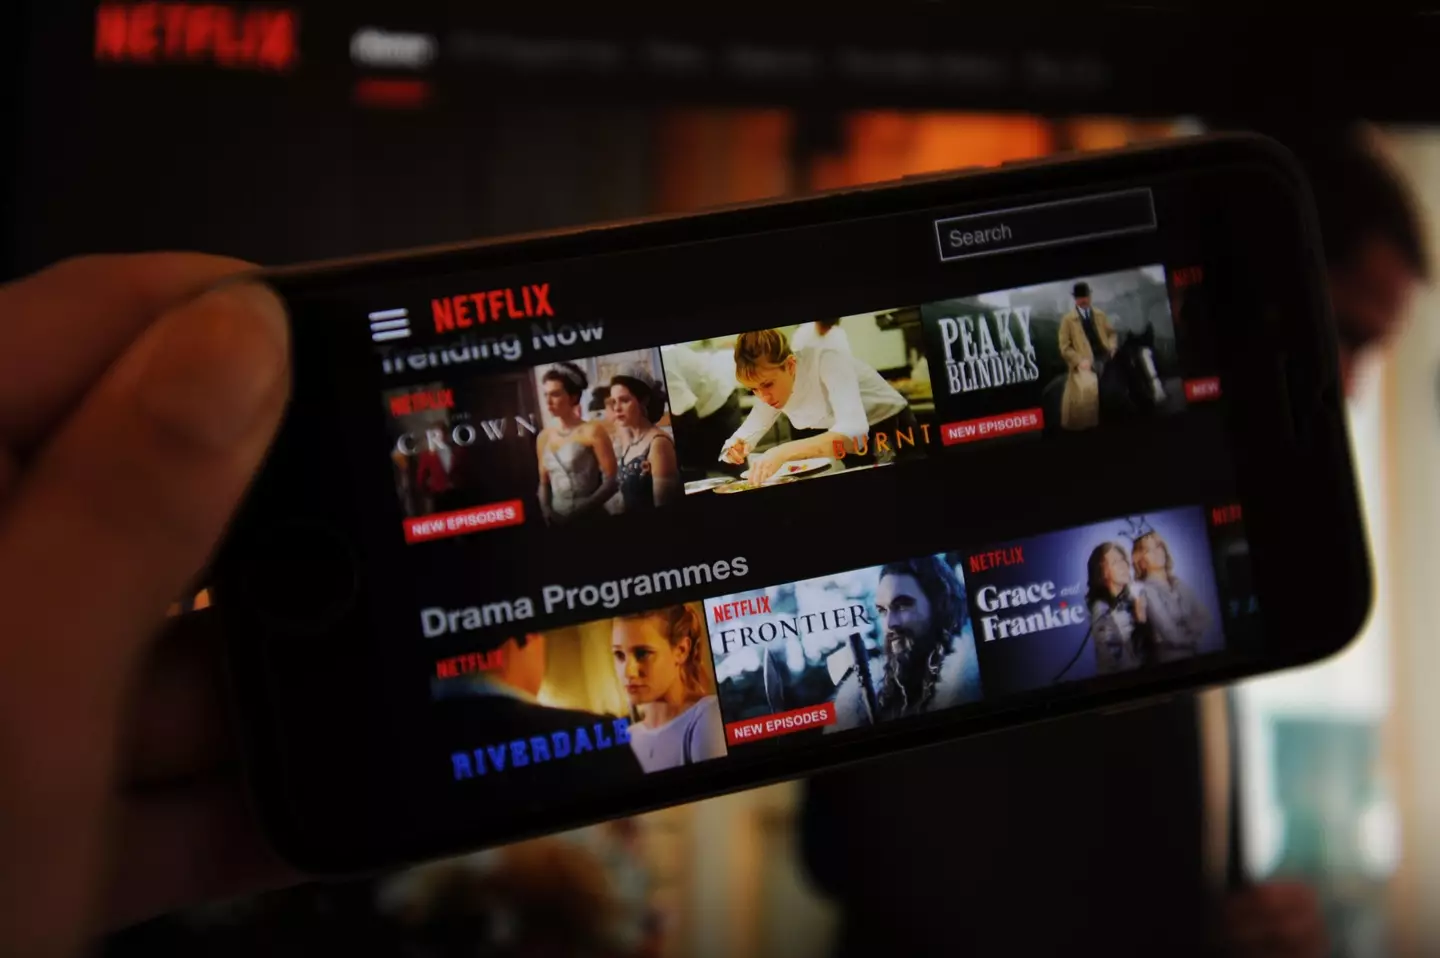 If you want a cheaper Netflix subscription you'll have to accept adverts.